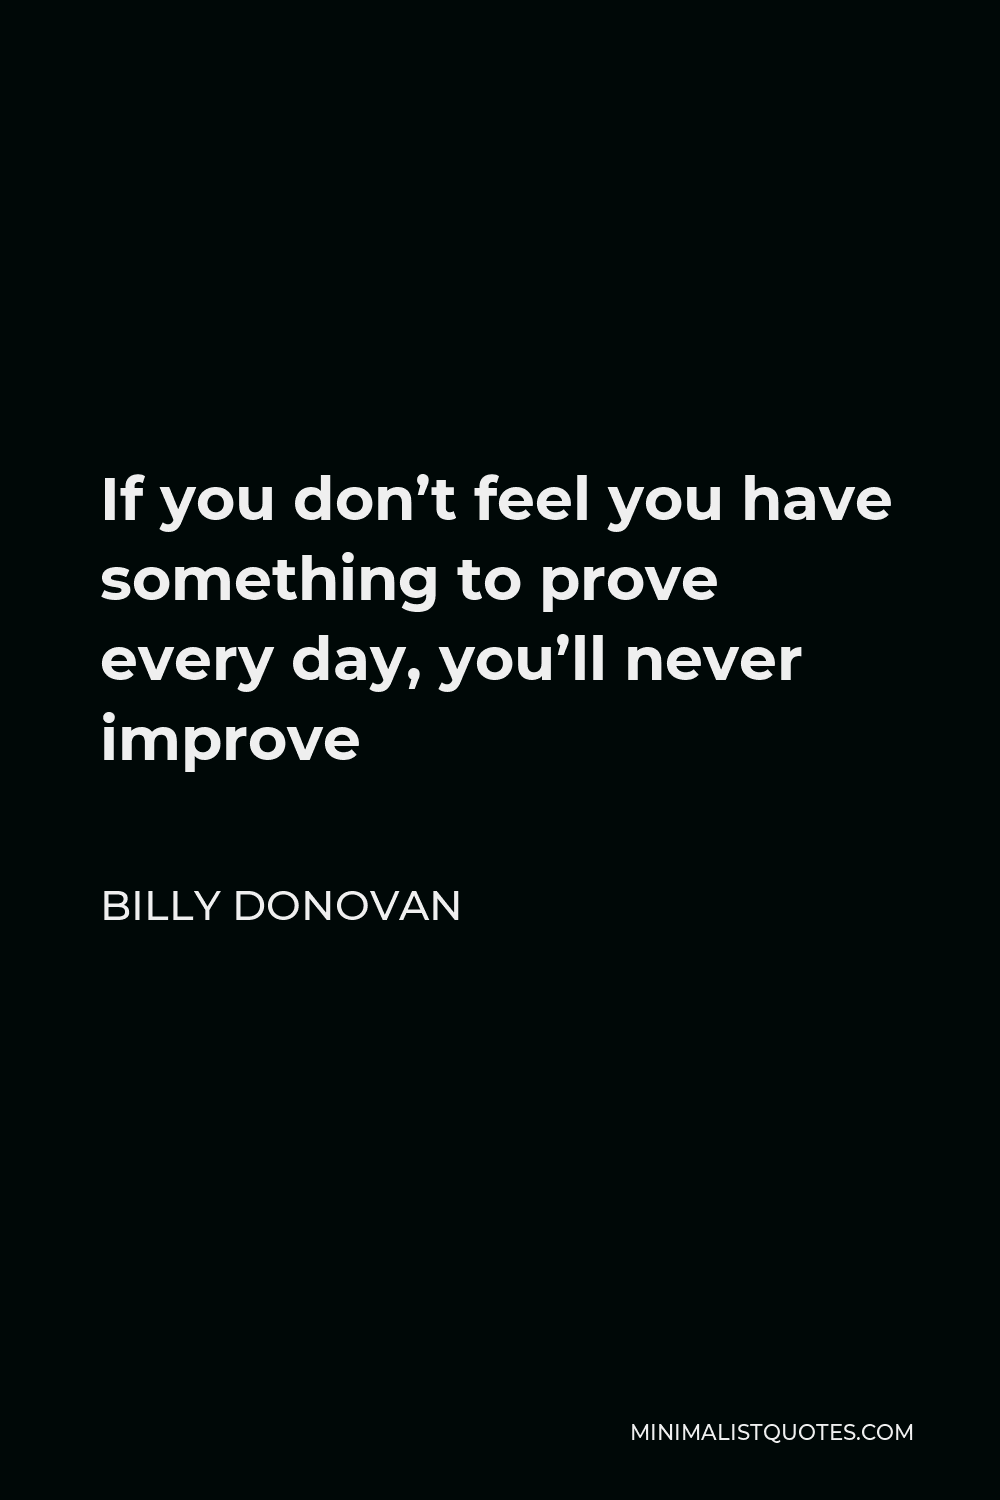 Billy Donovan Quote - If you don’t feel you have something to prove every day, you’ll never improve